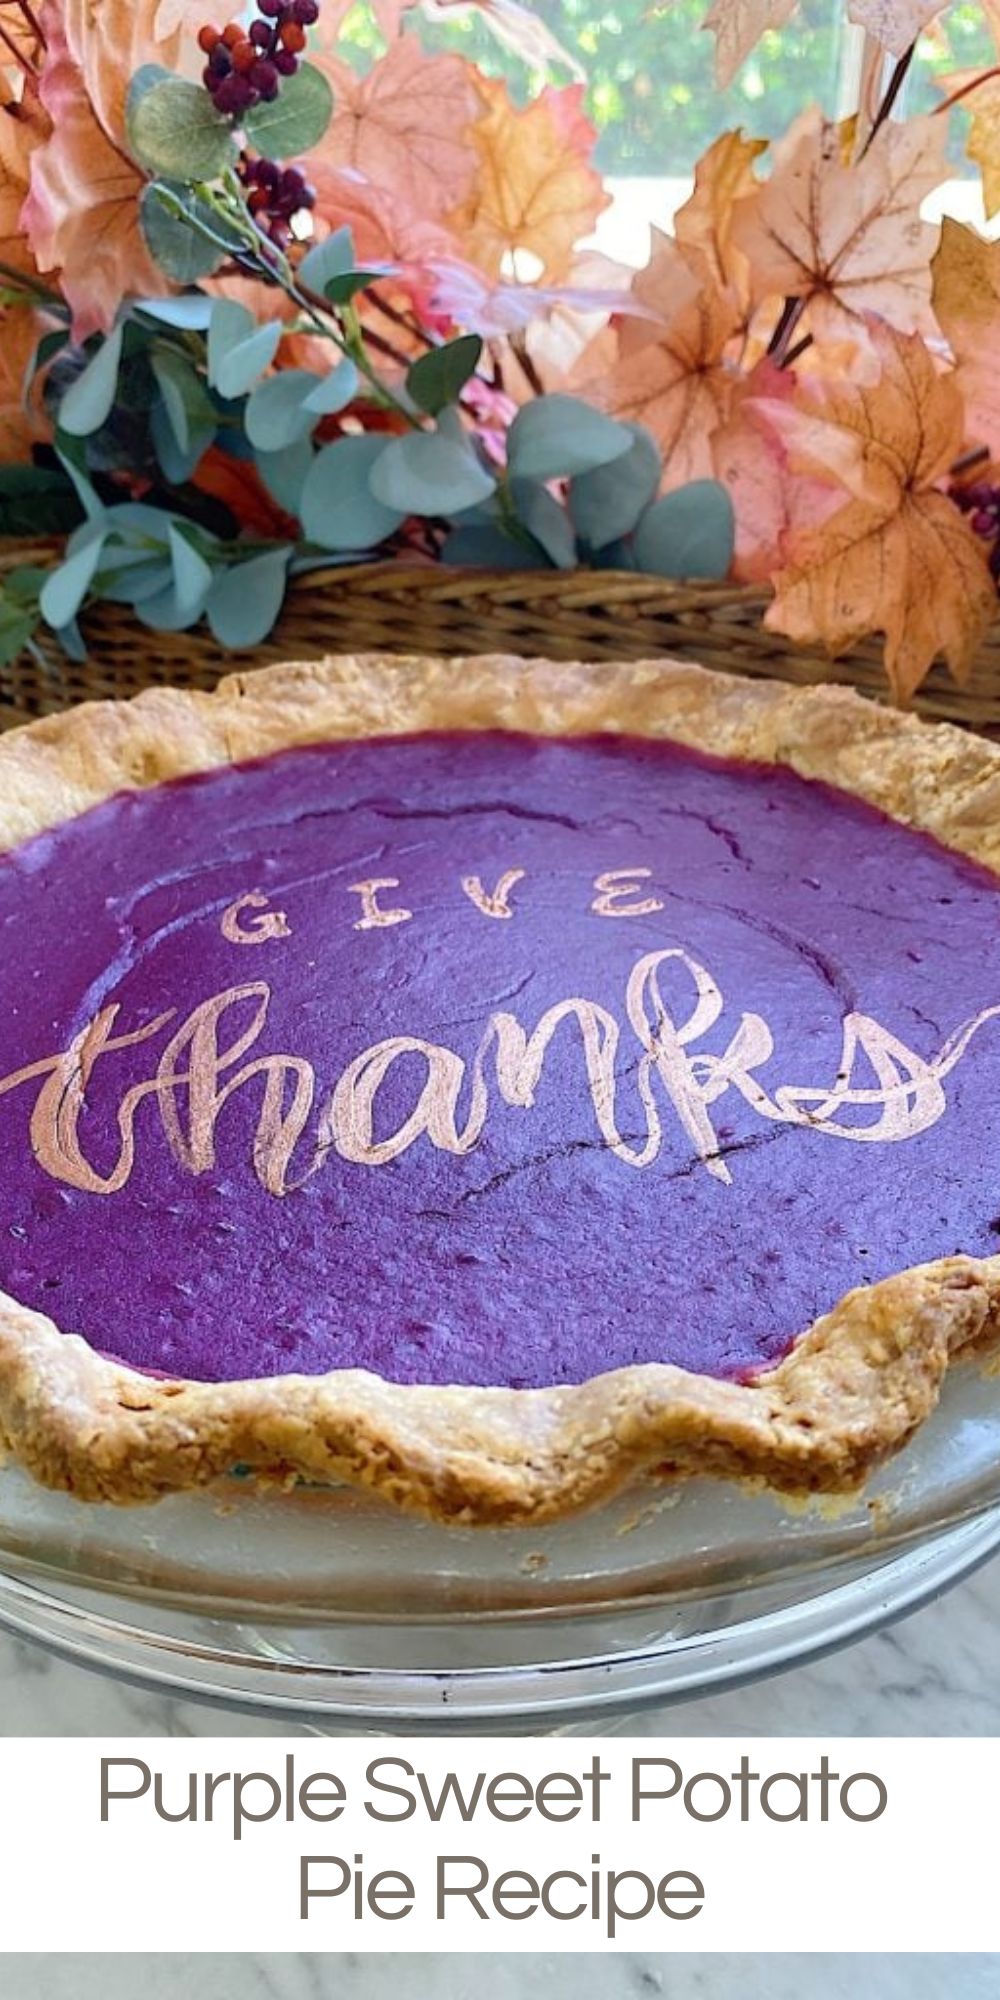 I am so excited to share this amazing Purple Sweet Potato Pie recipe. Not only is it beautiful, but it is also delicious and easy to make.